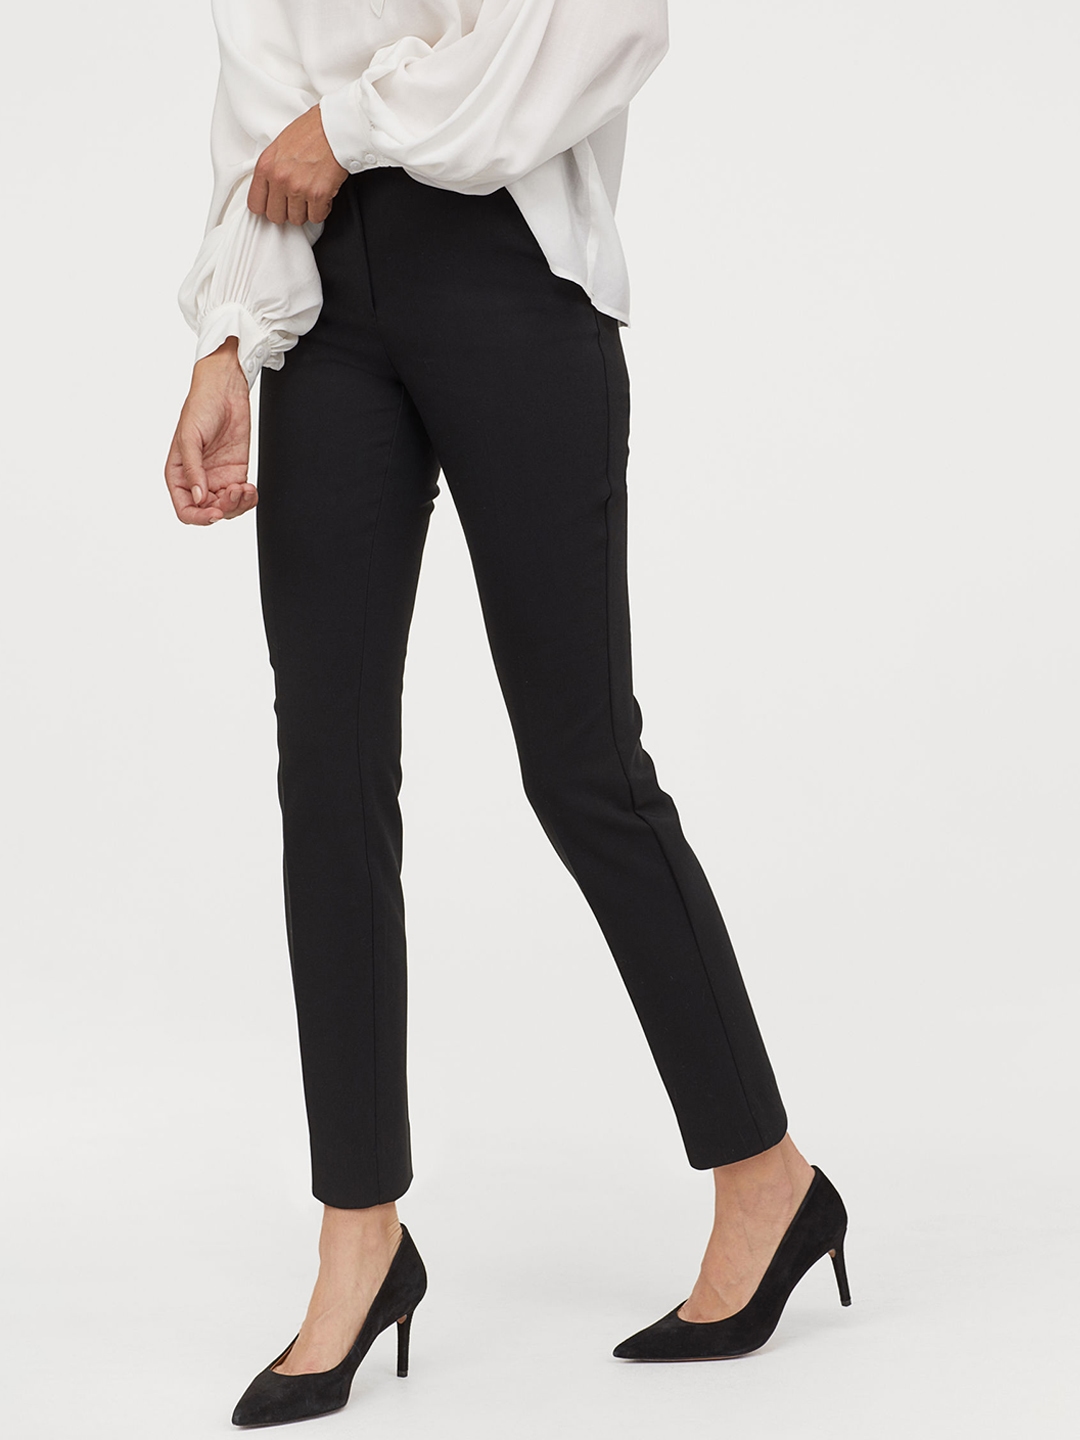 Buy MANGO Cigarette Trousers online - Women - 4 products | FASHIOLA.in